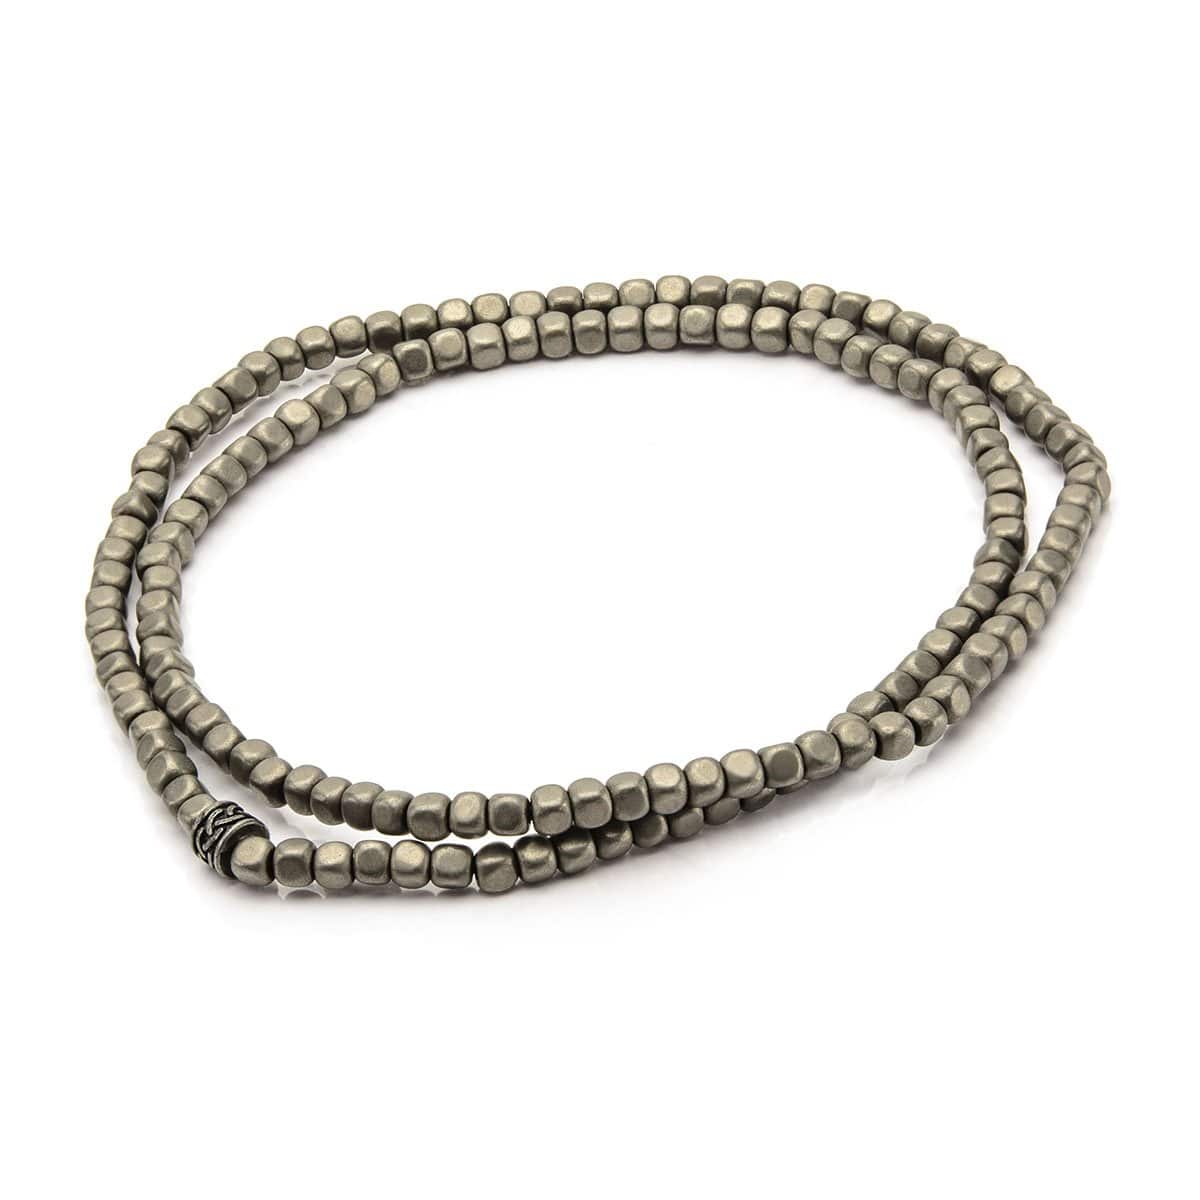 INOX JEWELRY Bracelets Antiqued Silver Tone Stainless Steel with Gray Hematite Stone Bead Intertwined Stackable Bracelet BR686123